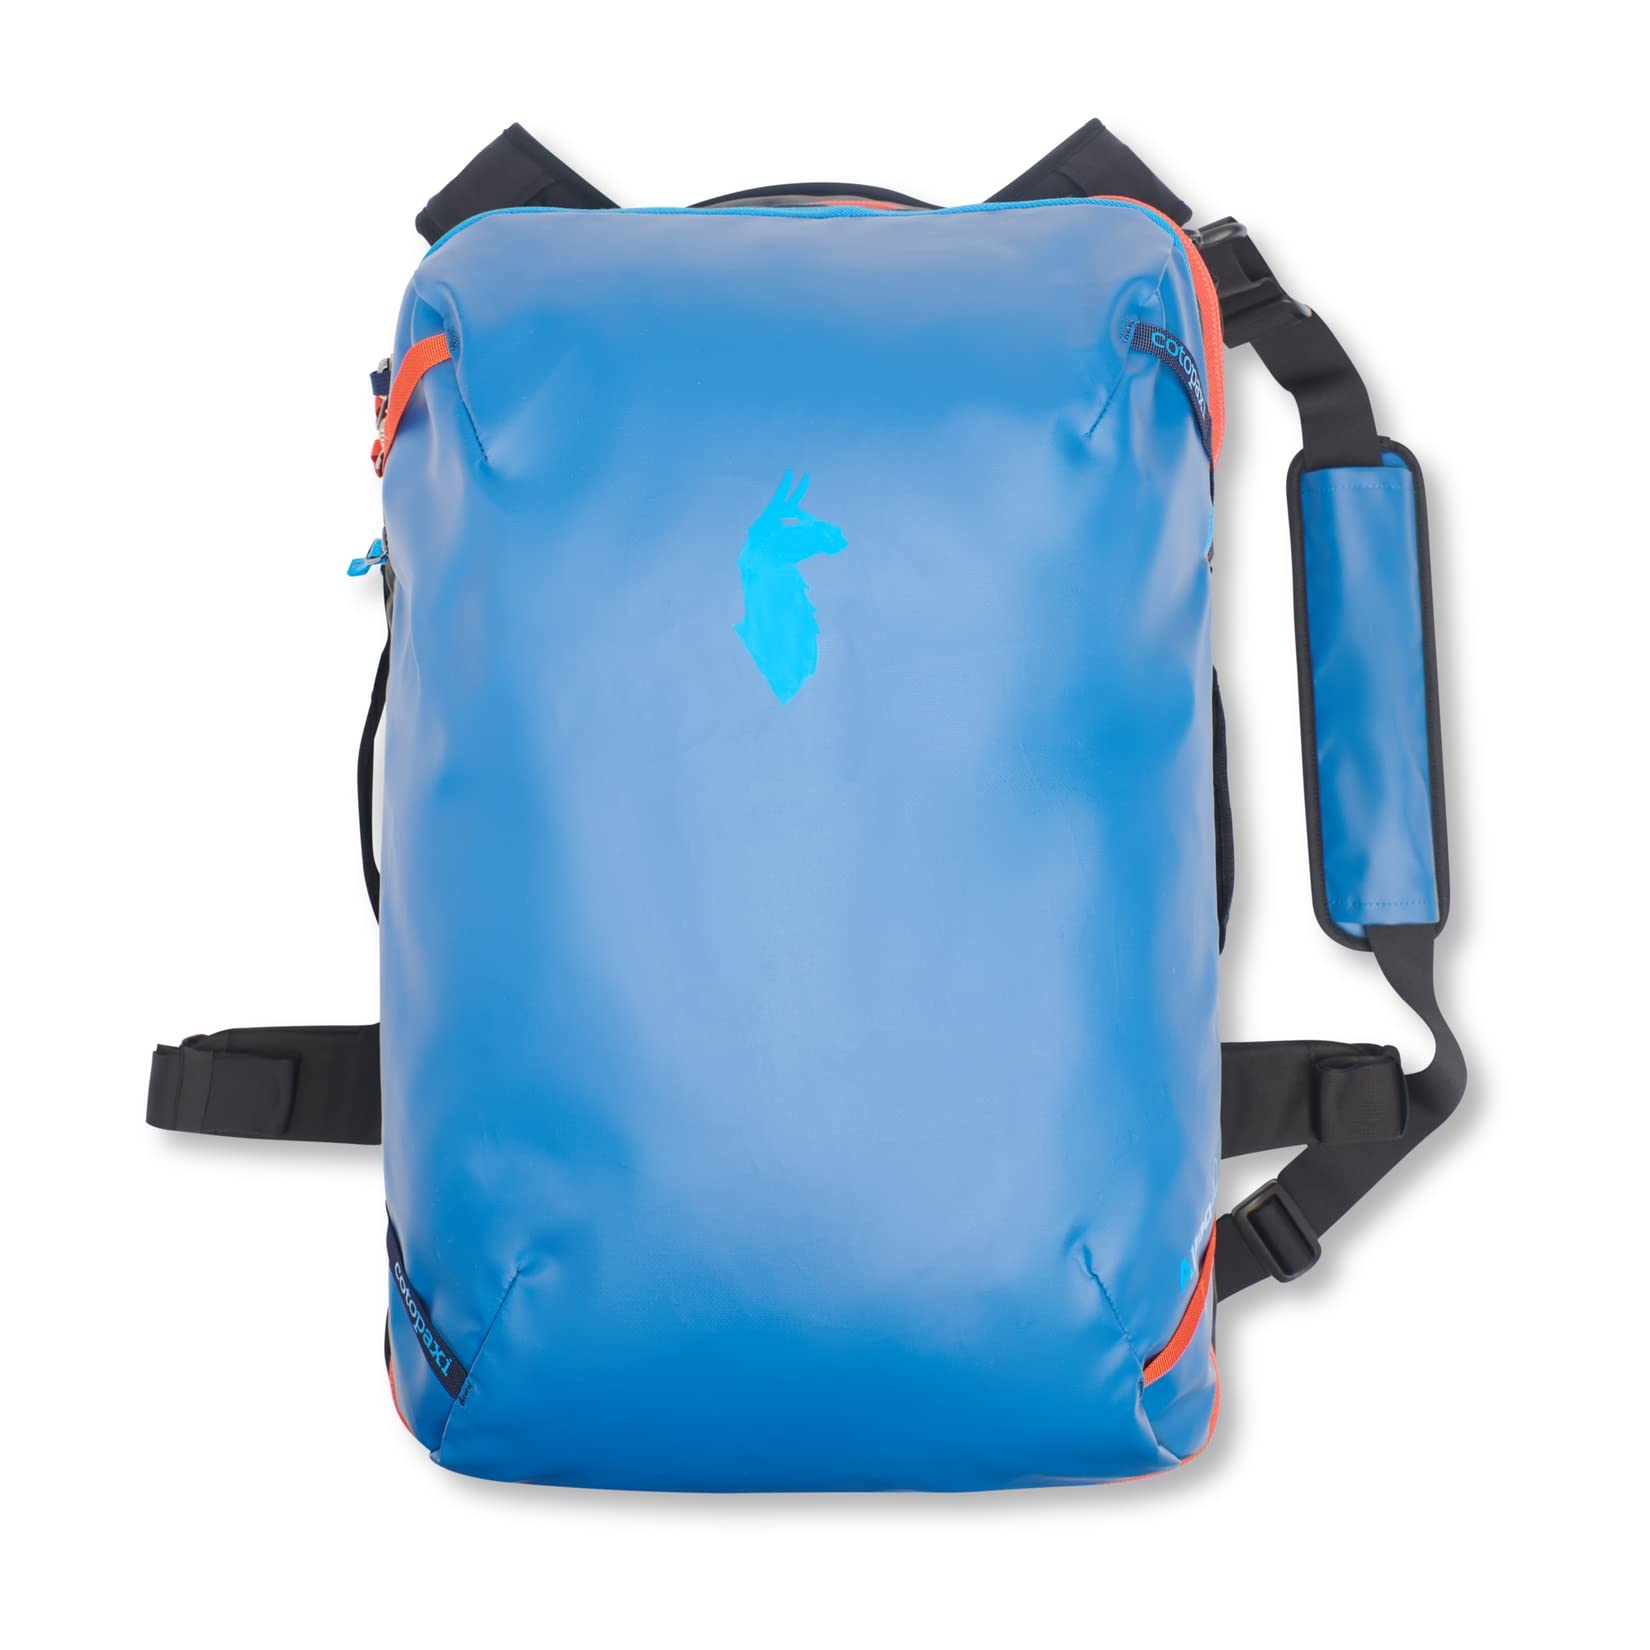 Cotopaxi Allpa 42L Travel Pack - Pacific